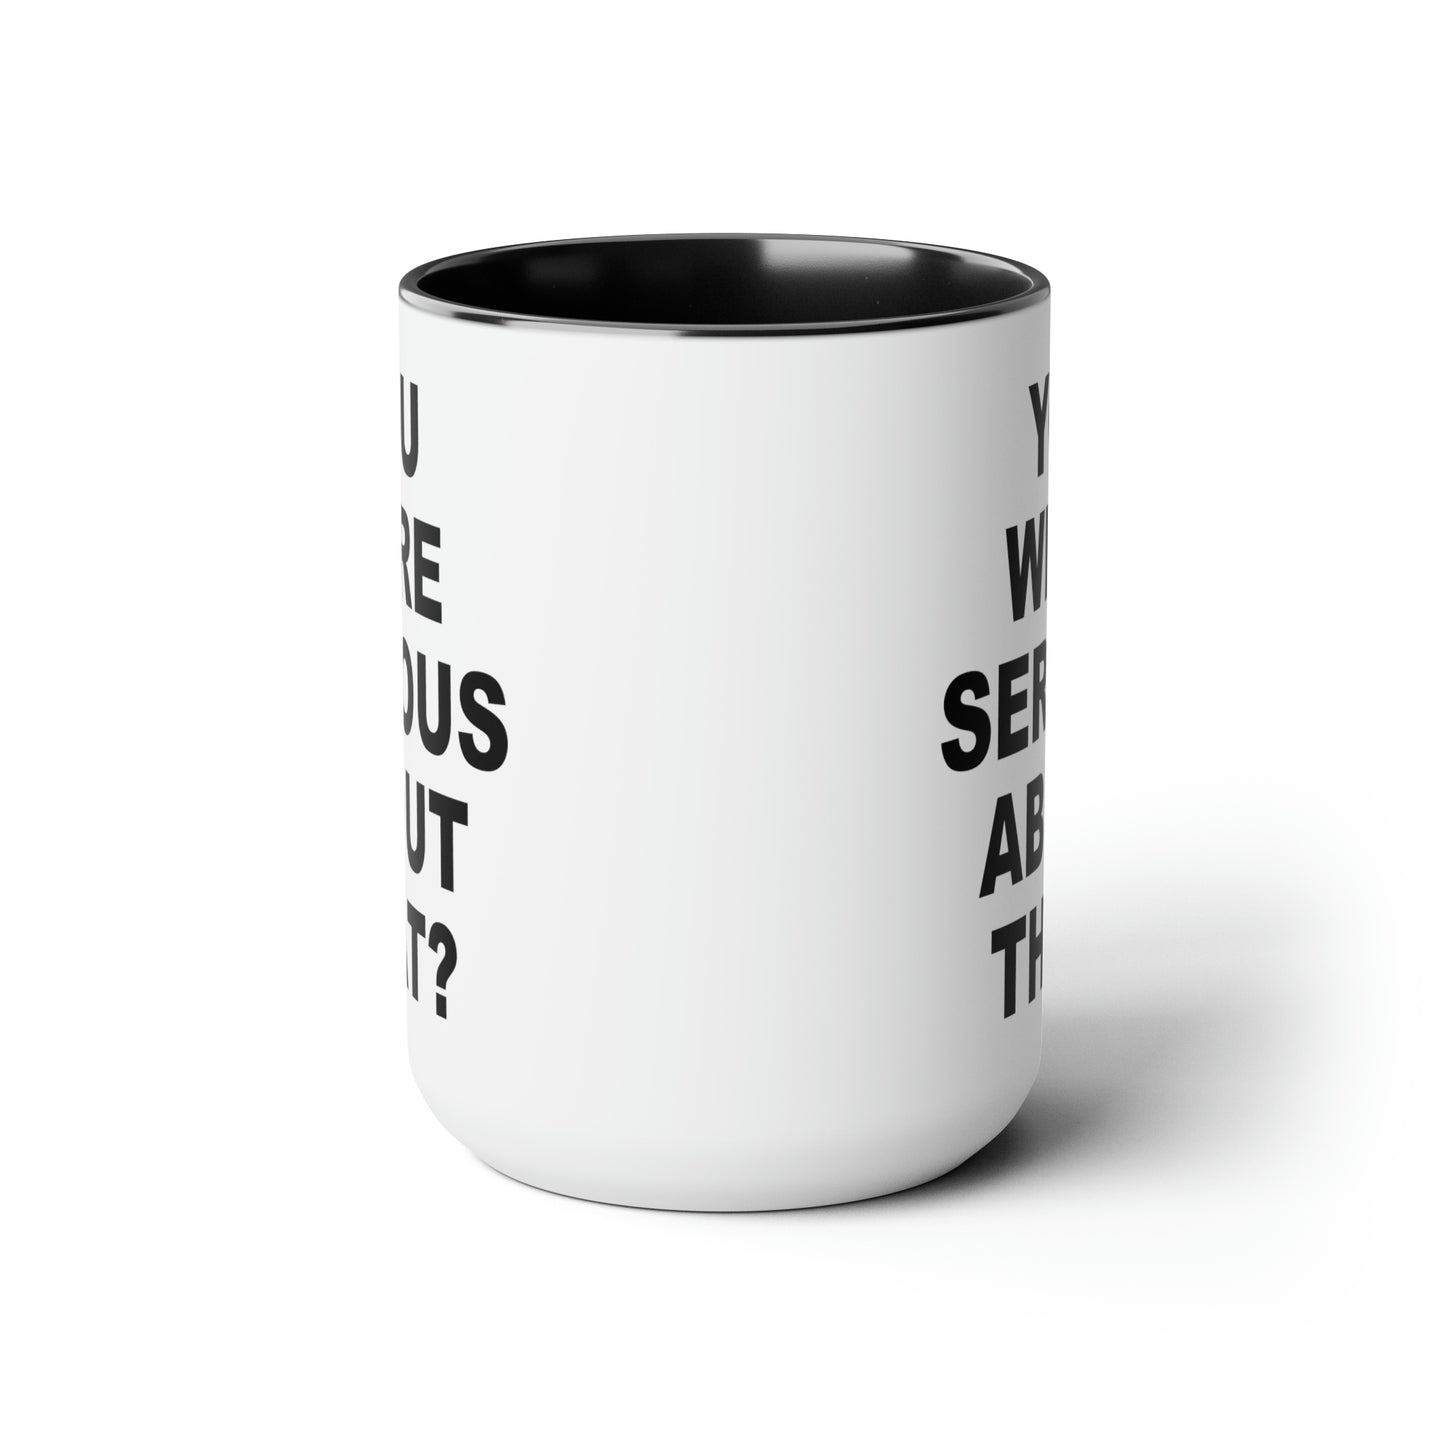 You Were Serious About That? Coffee Mug - Double Sided Black Accent White Ceramic 15oz by TheGlassyLass.com